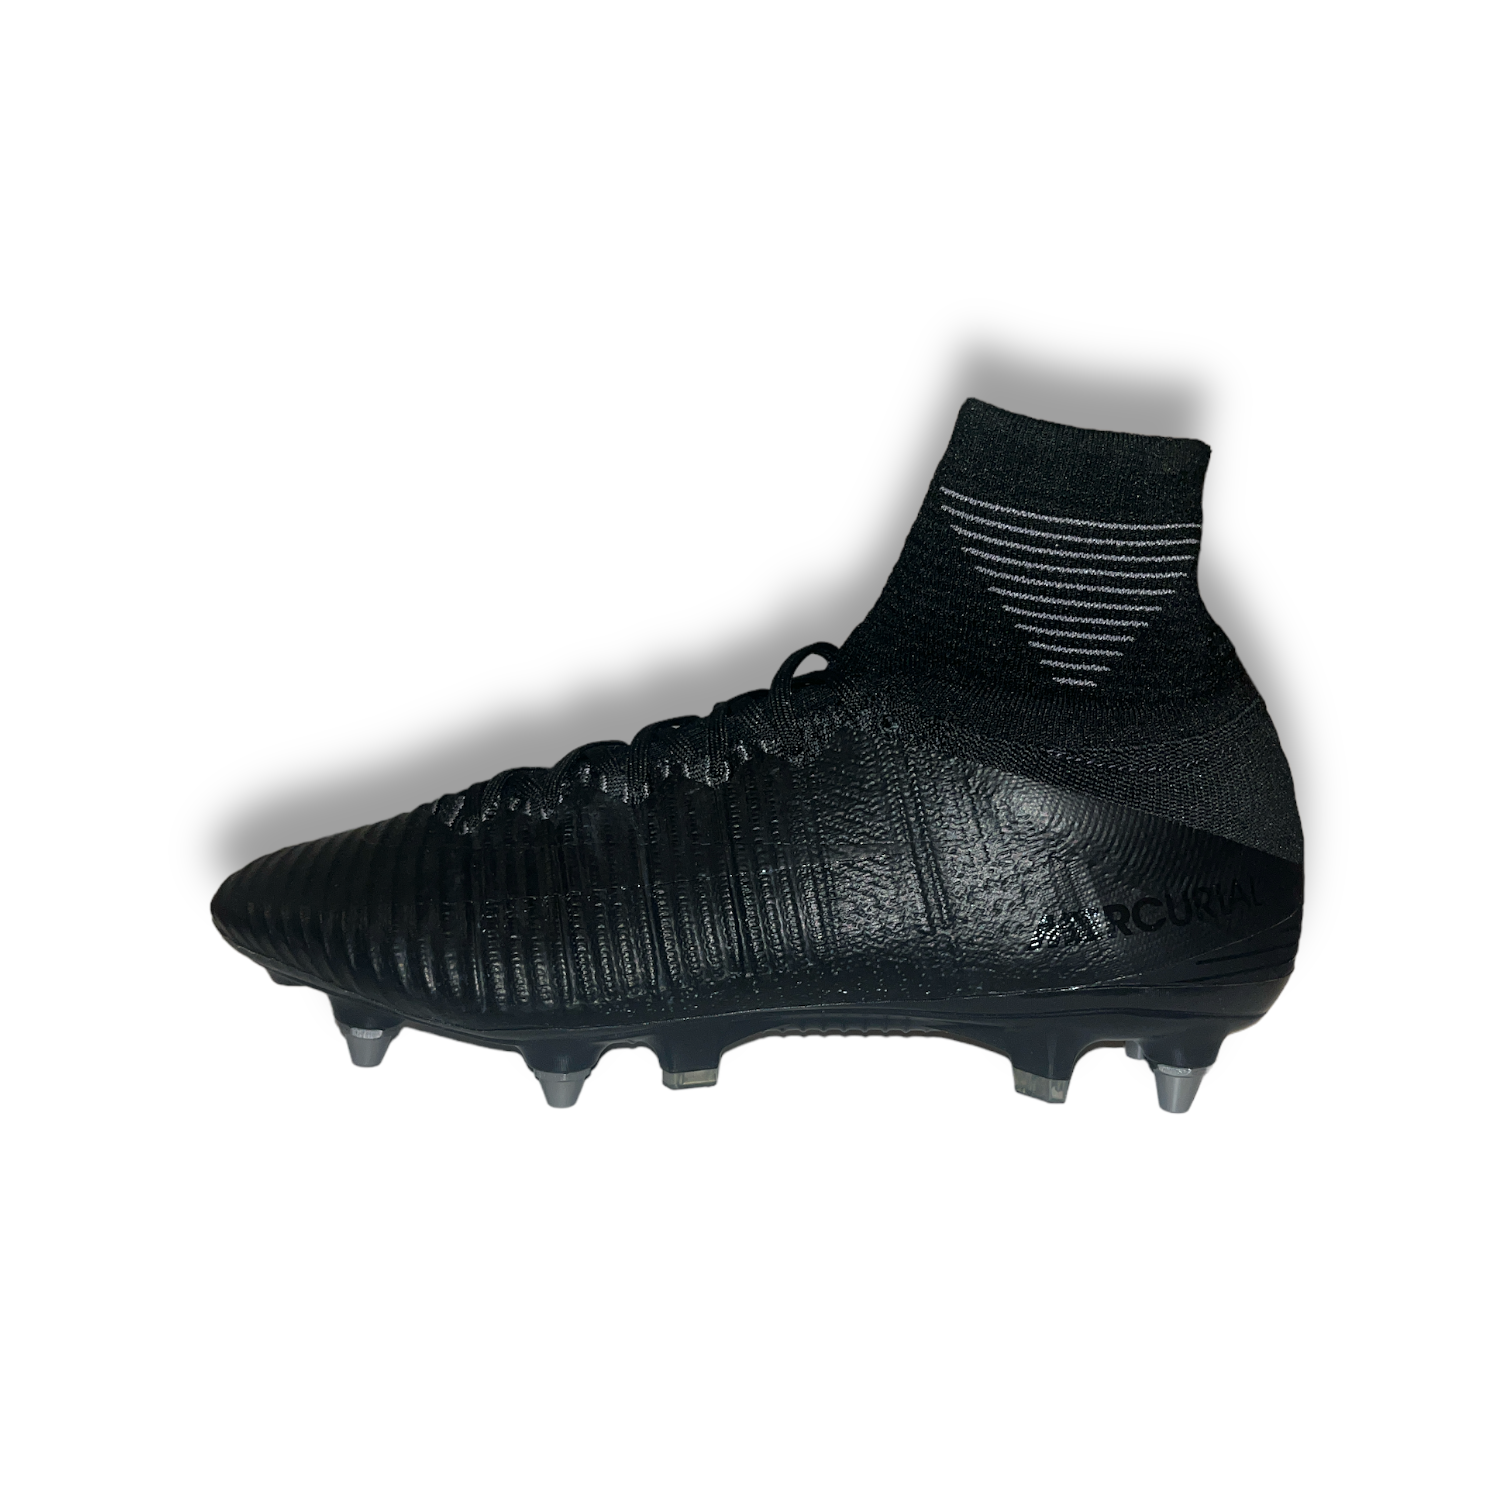 Th Arrugas S t Nike Mercurial Superfly V SG-Pro ID Blackout